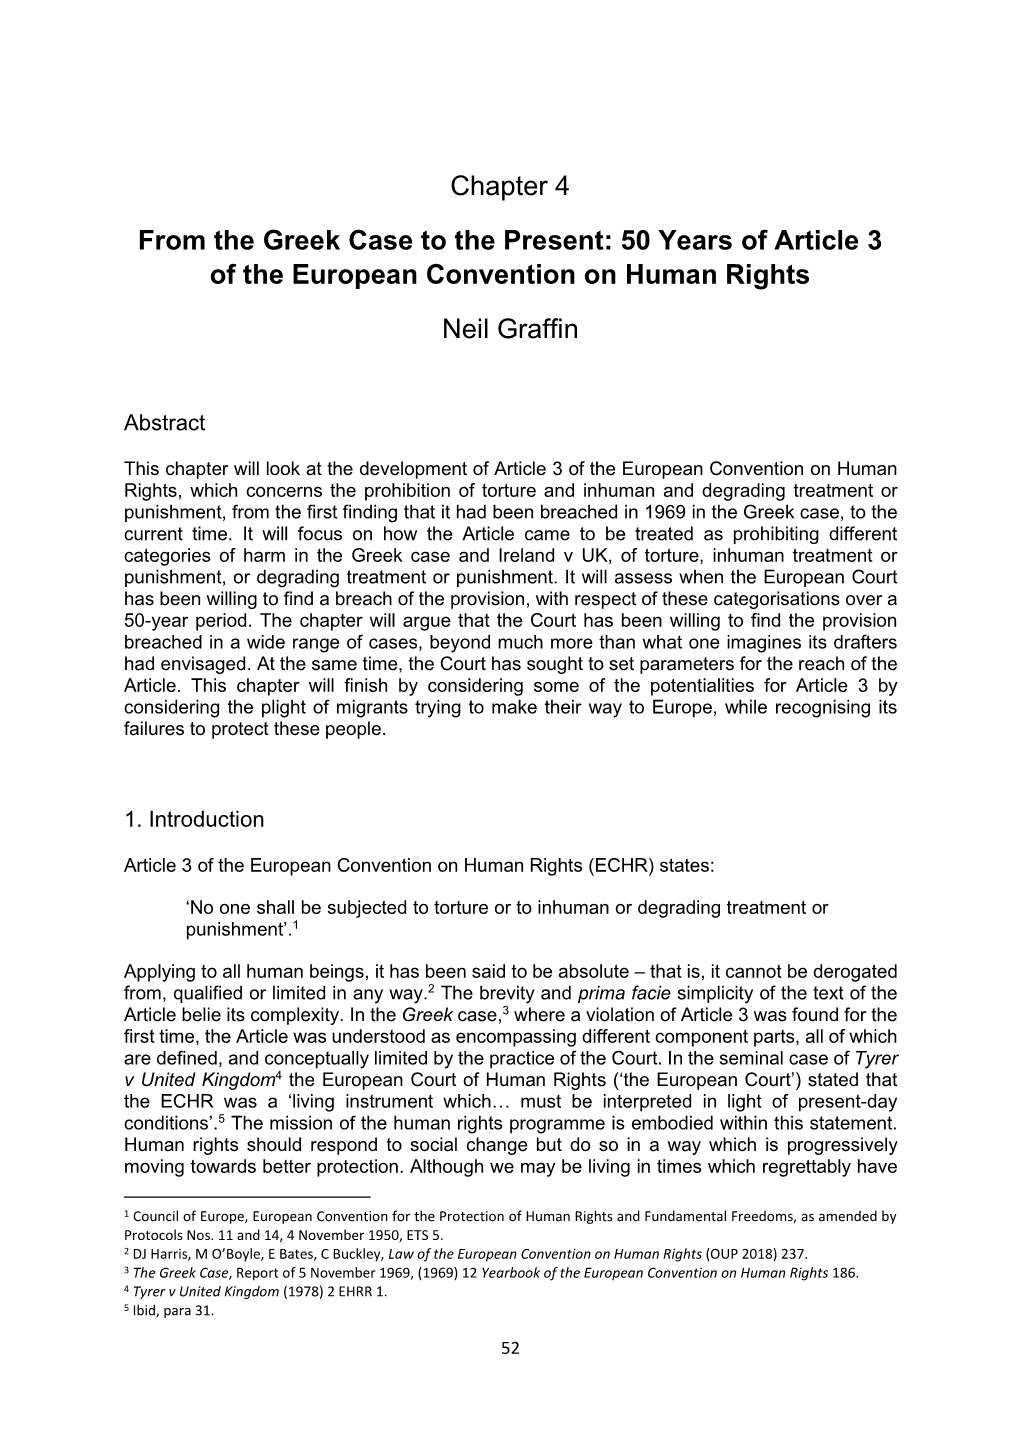 Chapter 4 from the Greek Case to the Present: 50 Years of Article 3 of the European Convention on Human Rights Neil Graffin